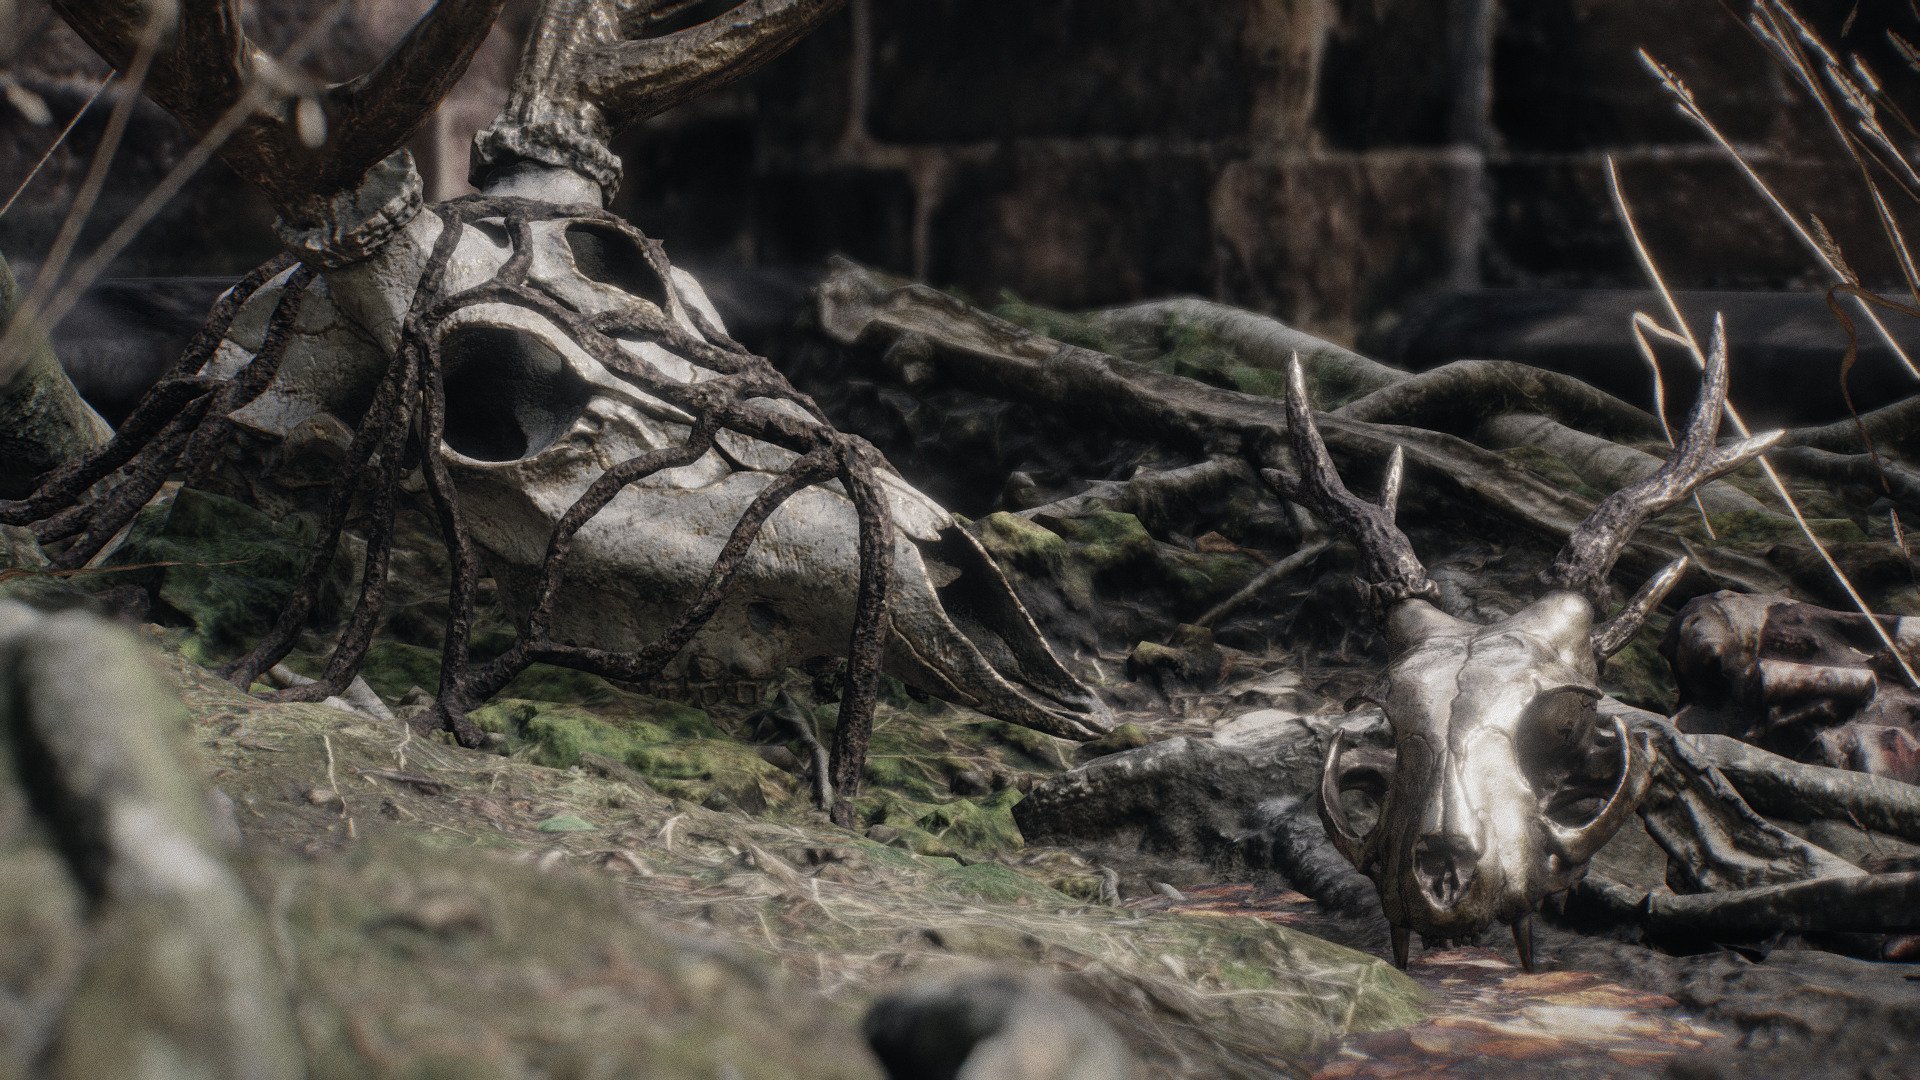 this scene features 2 new skulls i made. they were both sculpted, retopologized and textured by hand. the white deer skulls has 6K textures (the roots are a seperate mesh and can just be removed). the feline skull has 4K Textures. all the objects in this scene have PBR materials with at least 3 textures each 3d model